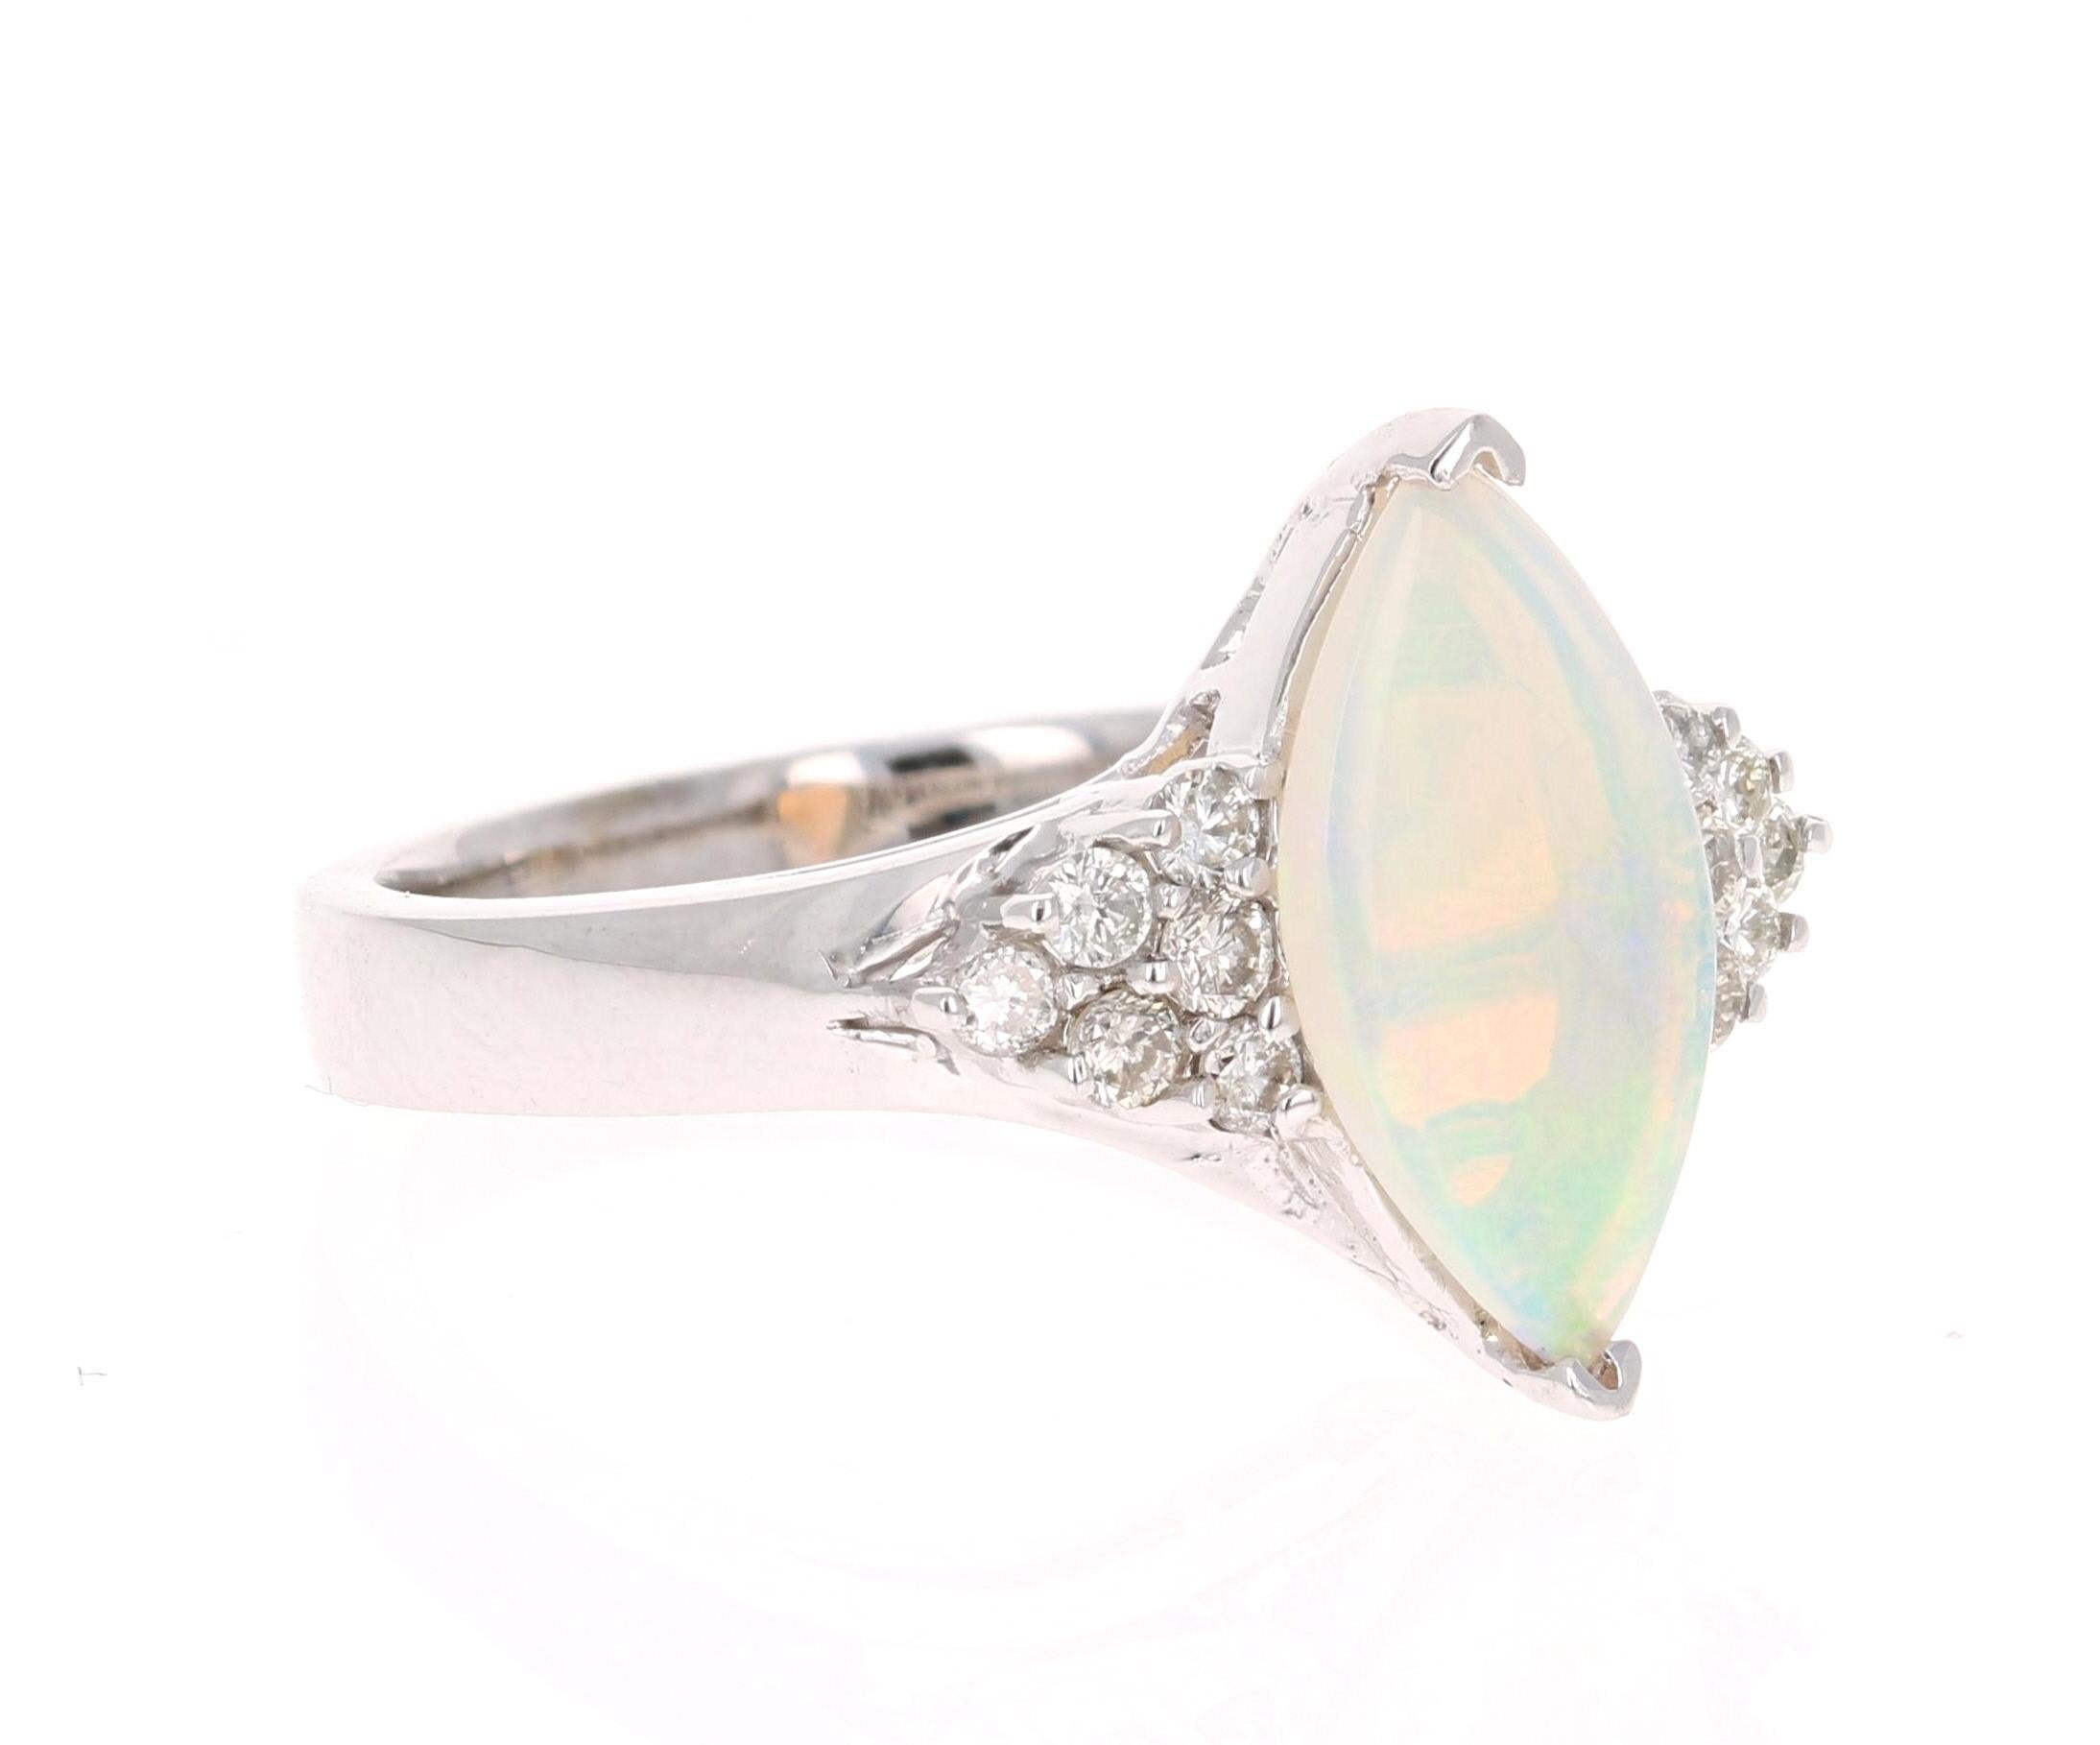 Cut and Dainty Opal and Diamond Ring!

This ring has a 1.07 Carat Marquise Cut Opal that is curated in a cute 14 Karat White Gold setting. The setting is adorned with 12 Round Cut Diamonds that weigh 0.29 Carats. The total carat weight of the ring